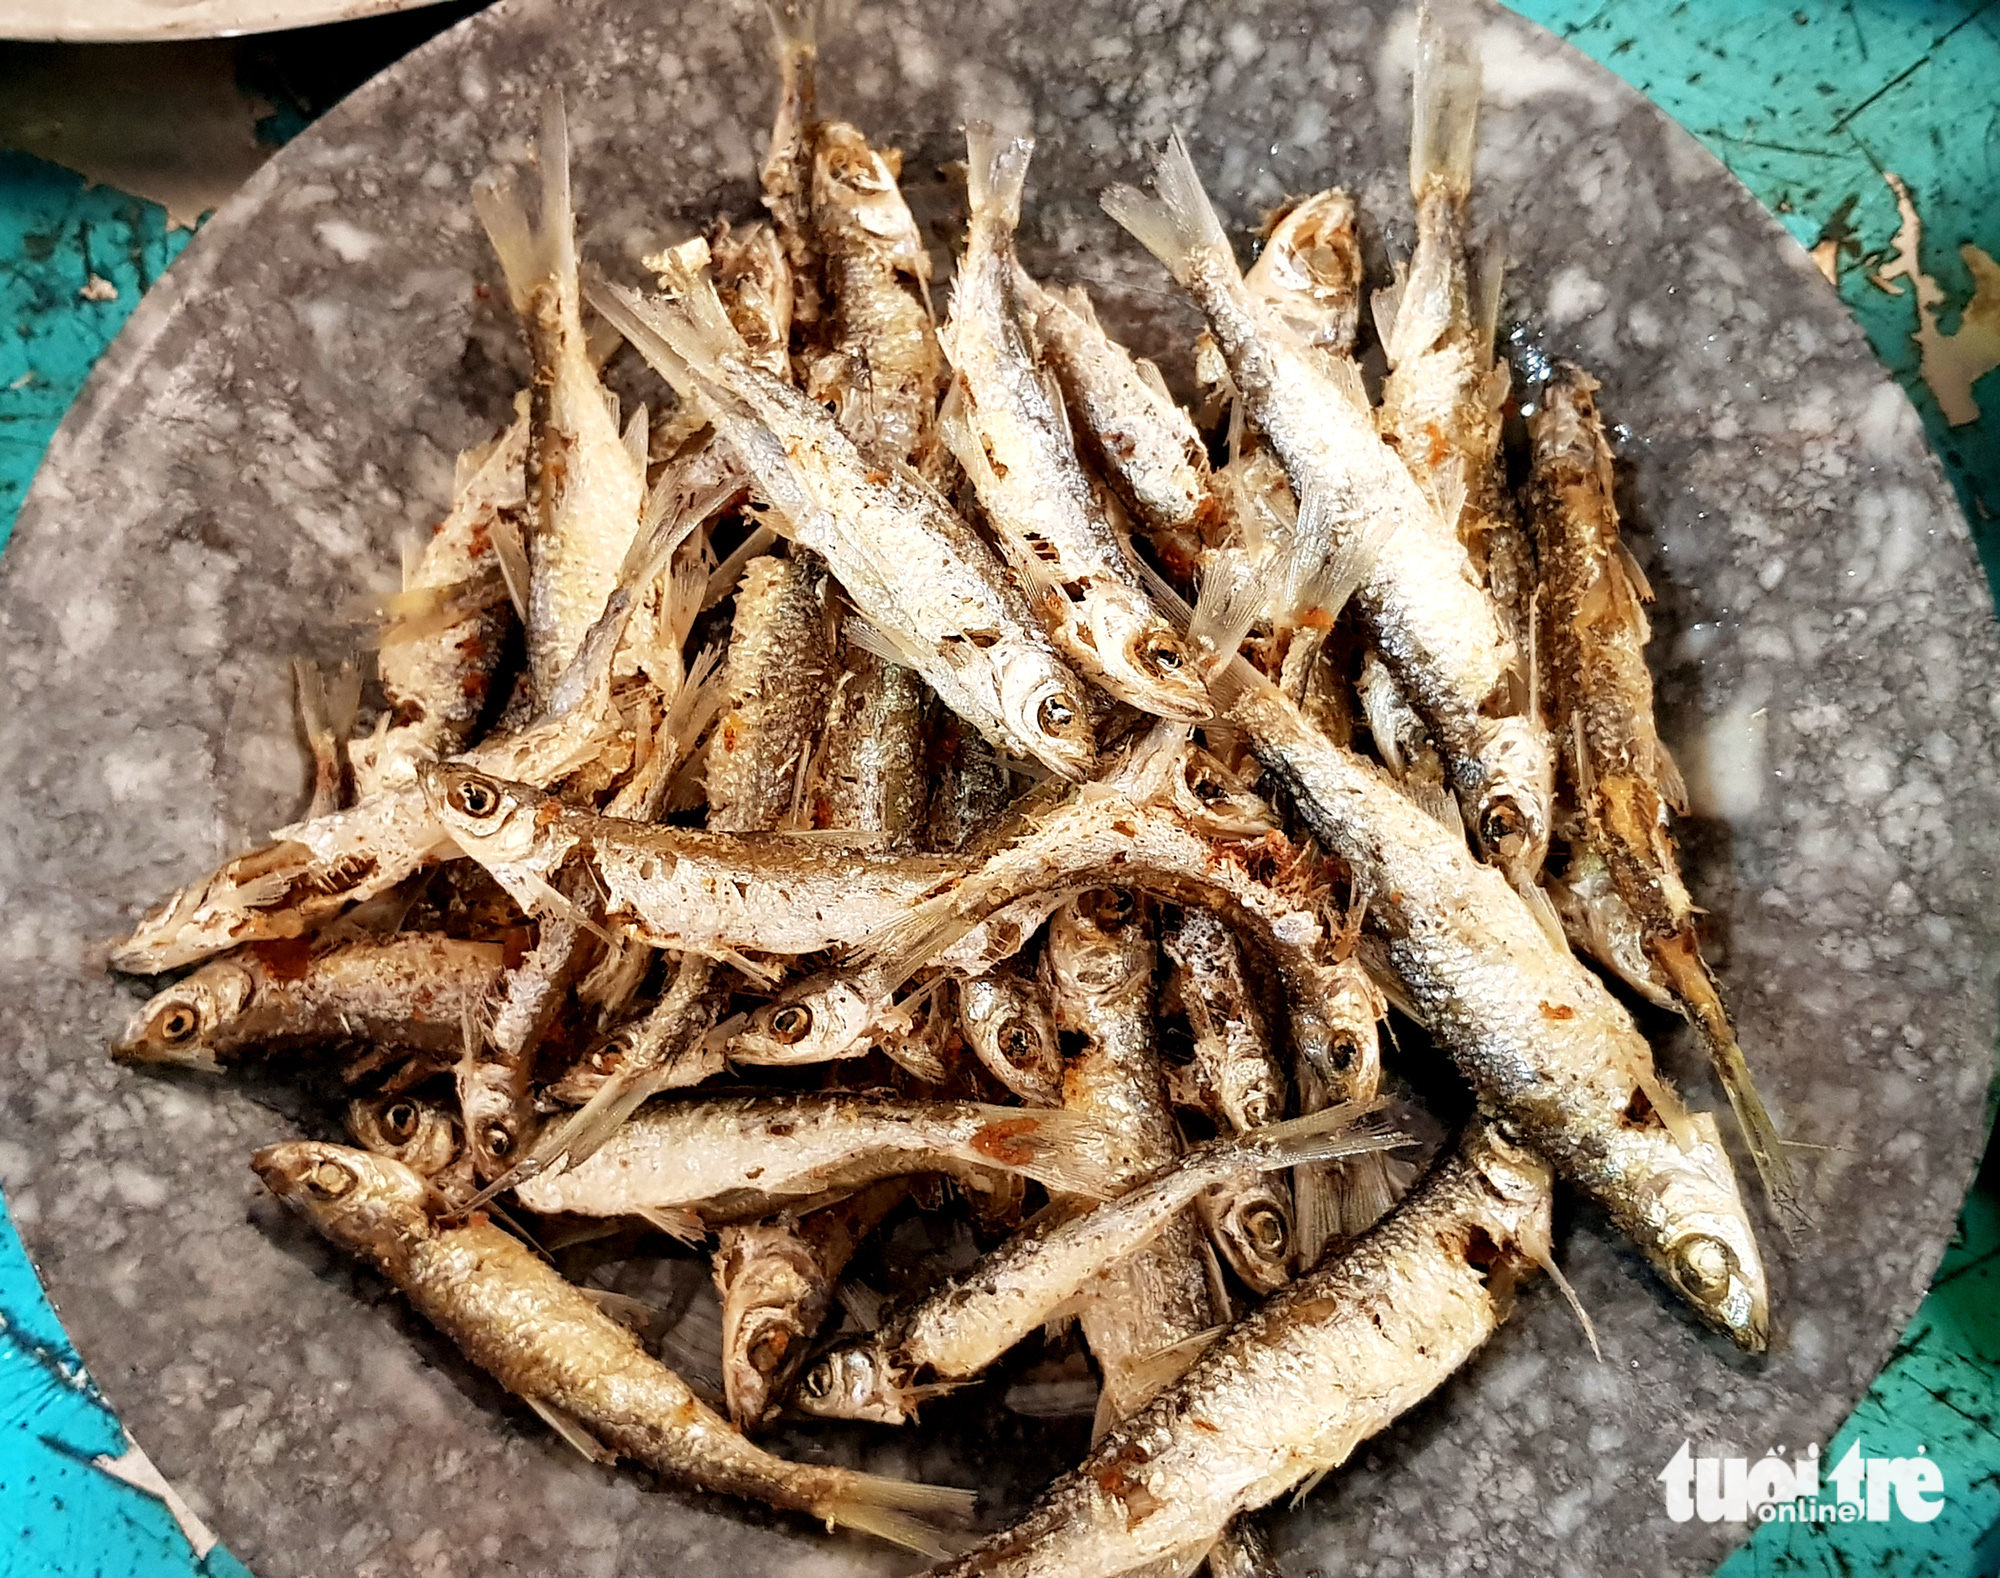 Fried fish served with fish sauce mixed with smashed cilantro is a specialty in Dong Xuan District, Phu Yen Province.